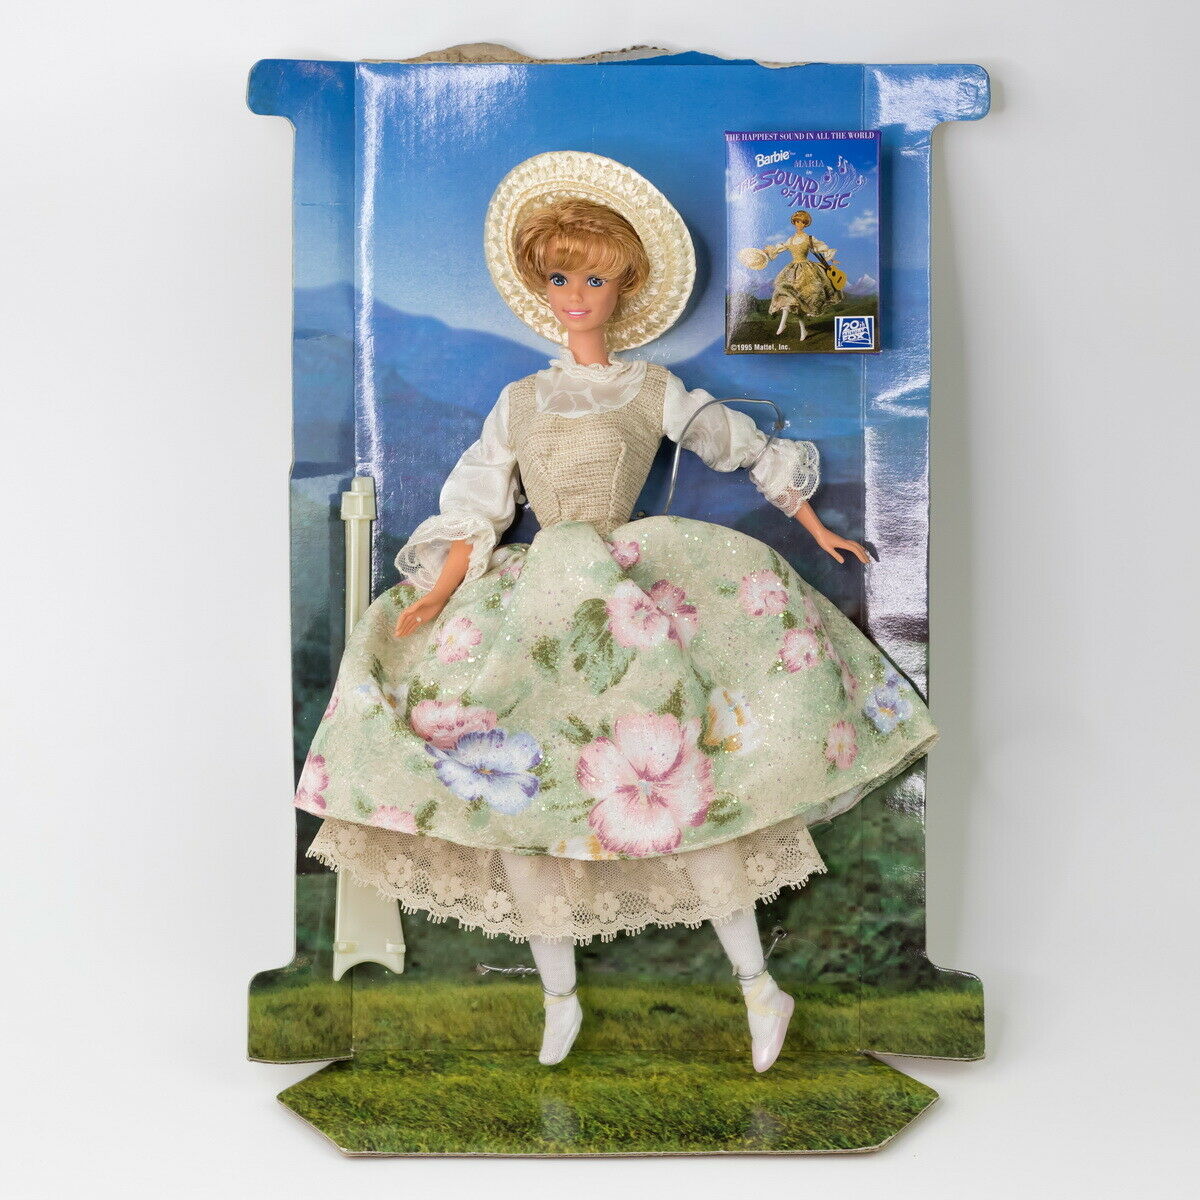 1995 Mattel Barbie Doll As Maria In The Sound Of Music